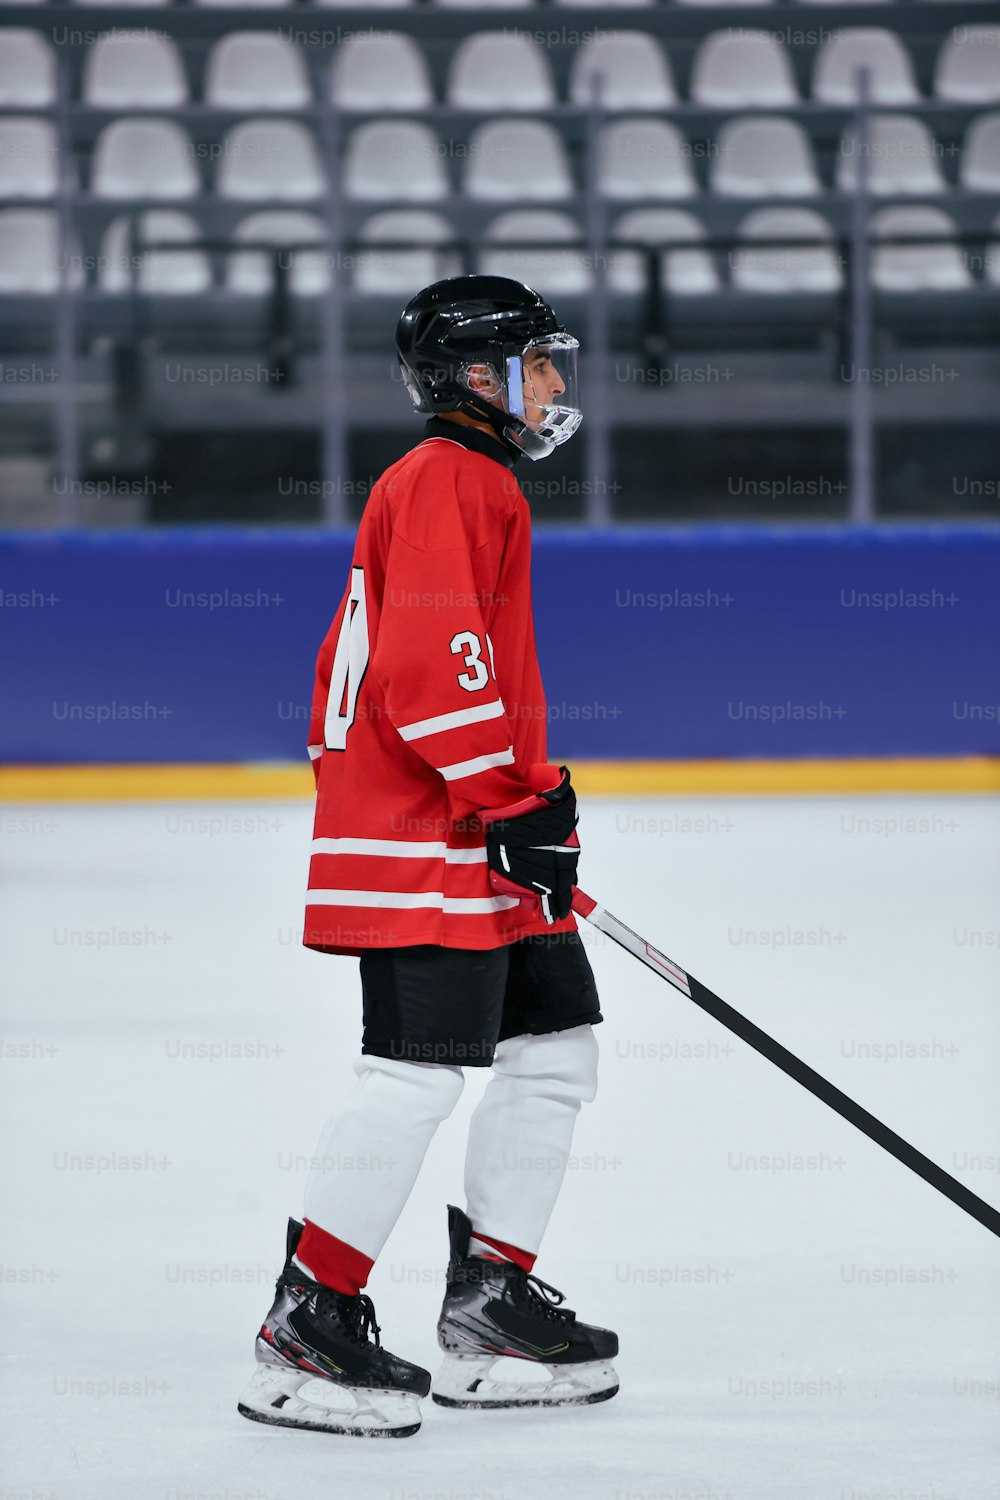 a hockey player in a red jersey holding a stick